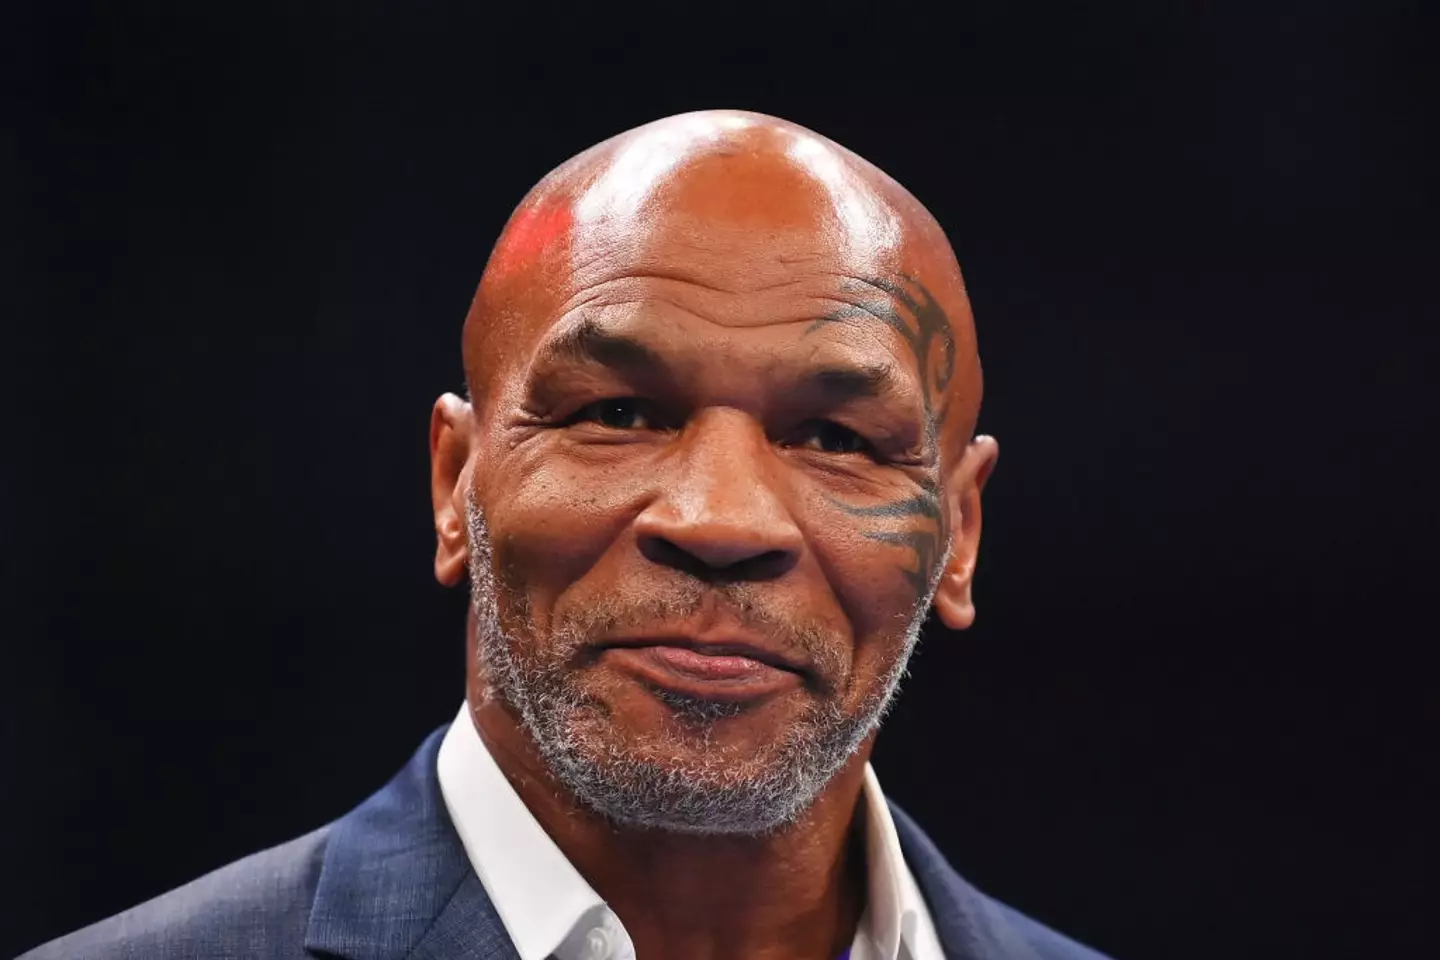 Mike Tyson will return to the ring in June (Image: Getty)